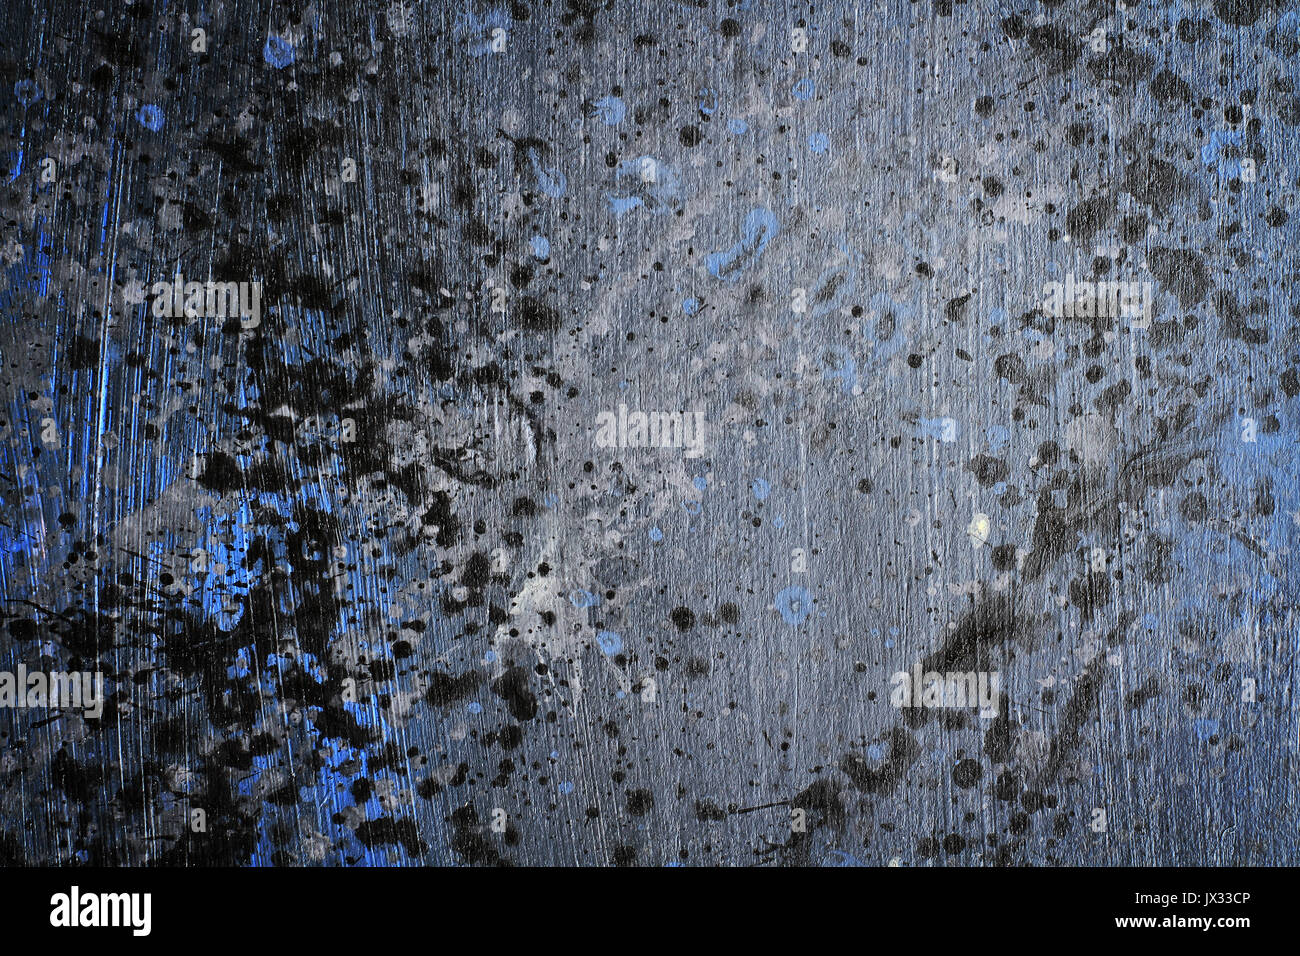 Hand painted splattered black, blue and grey wood grain texture background with acrylic paint splatter Stock Photo